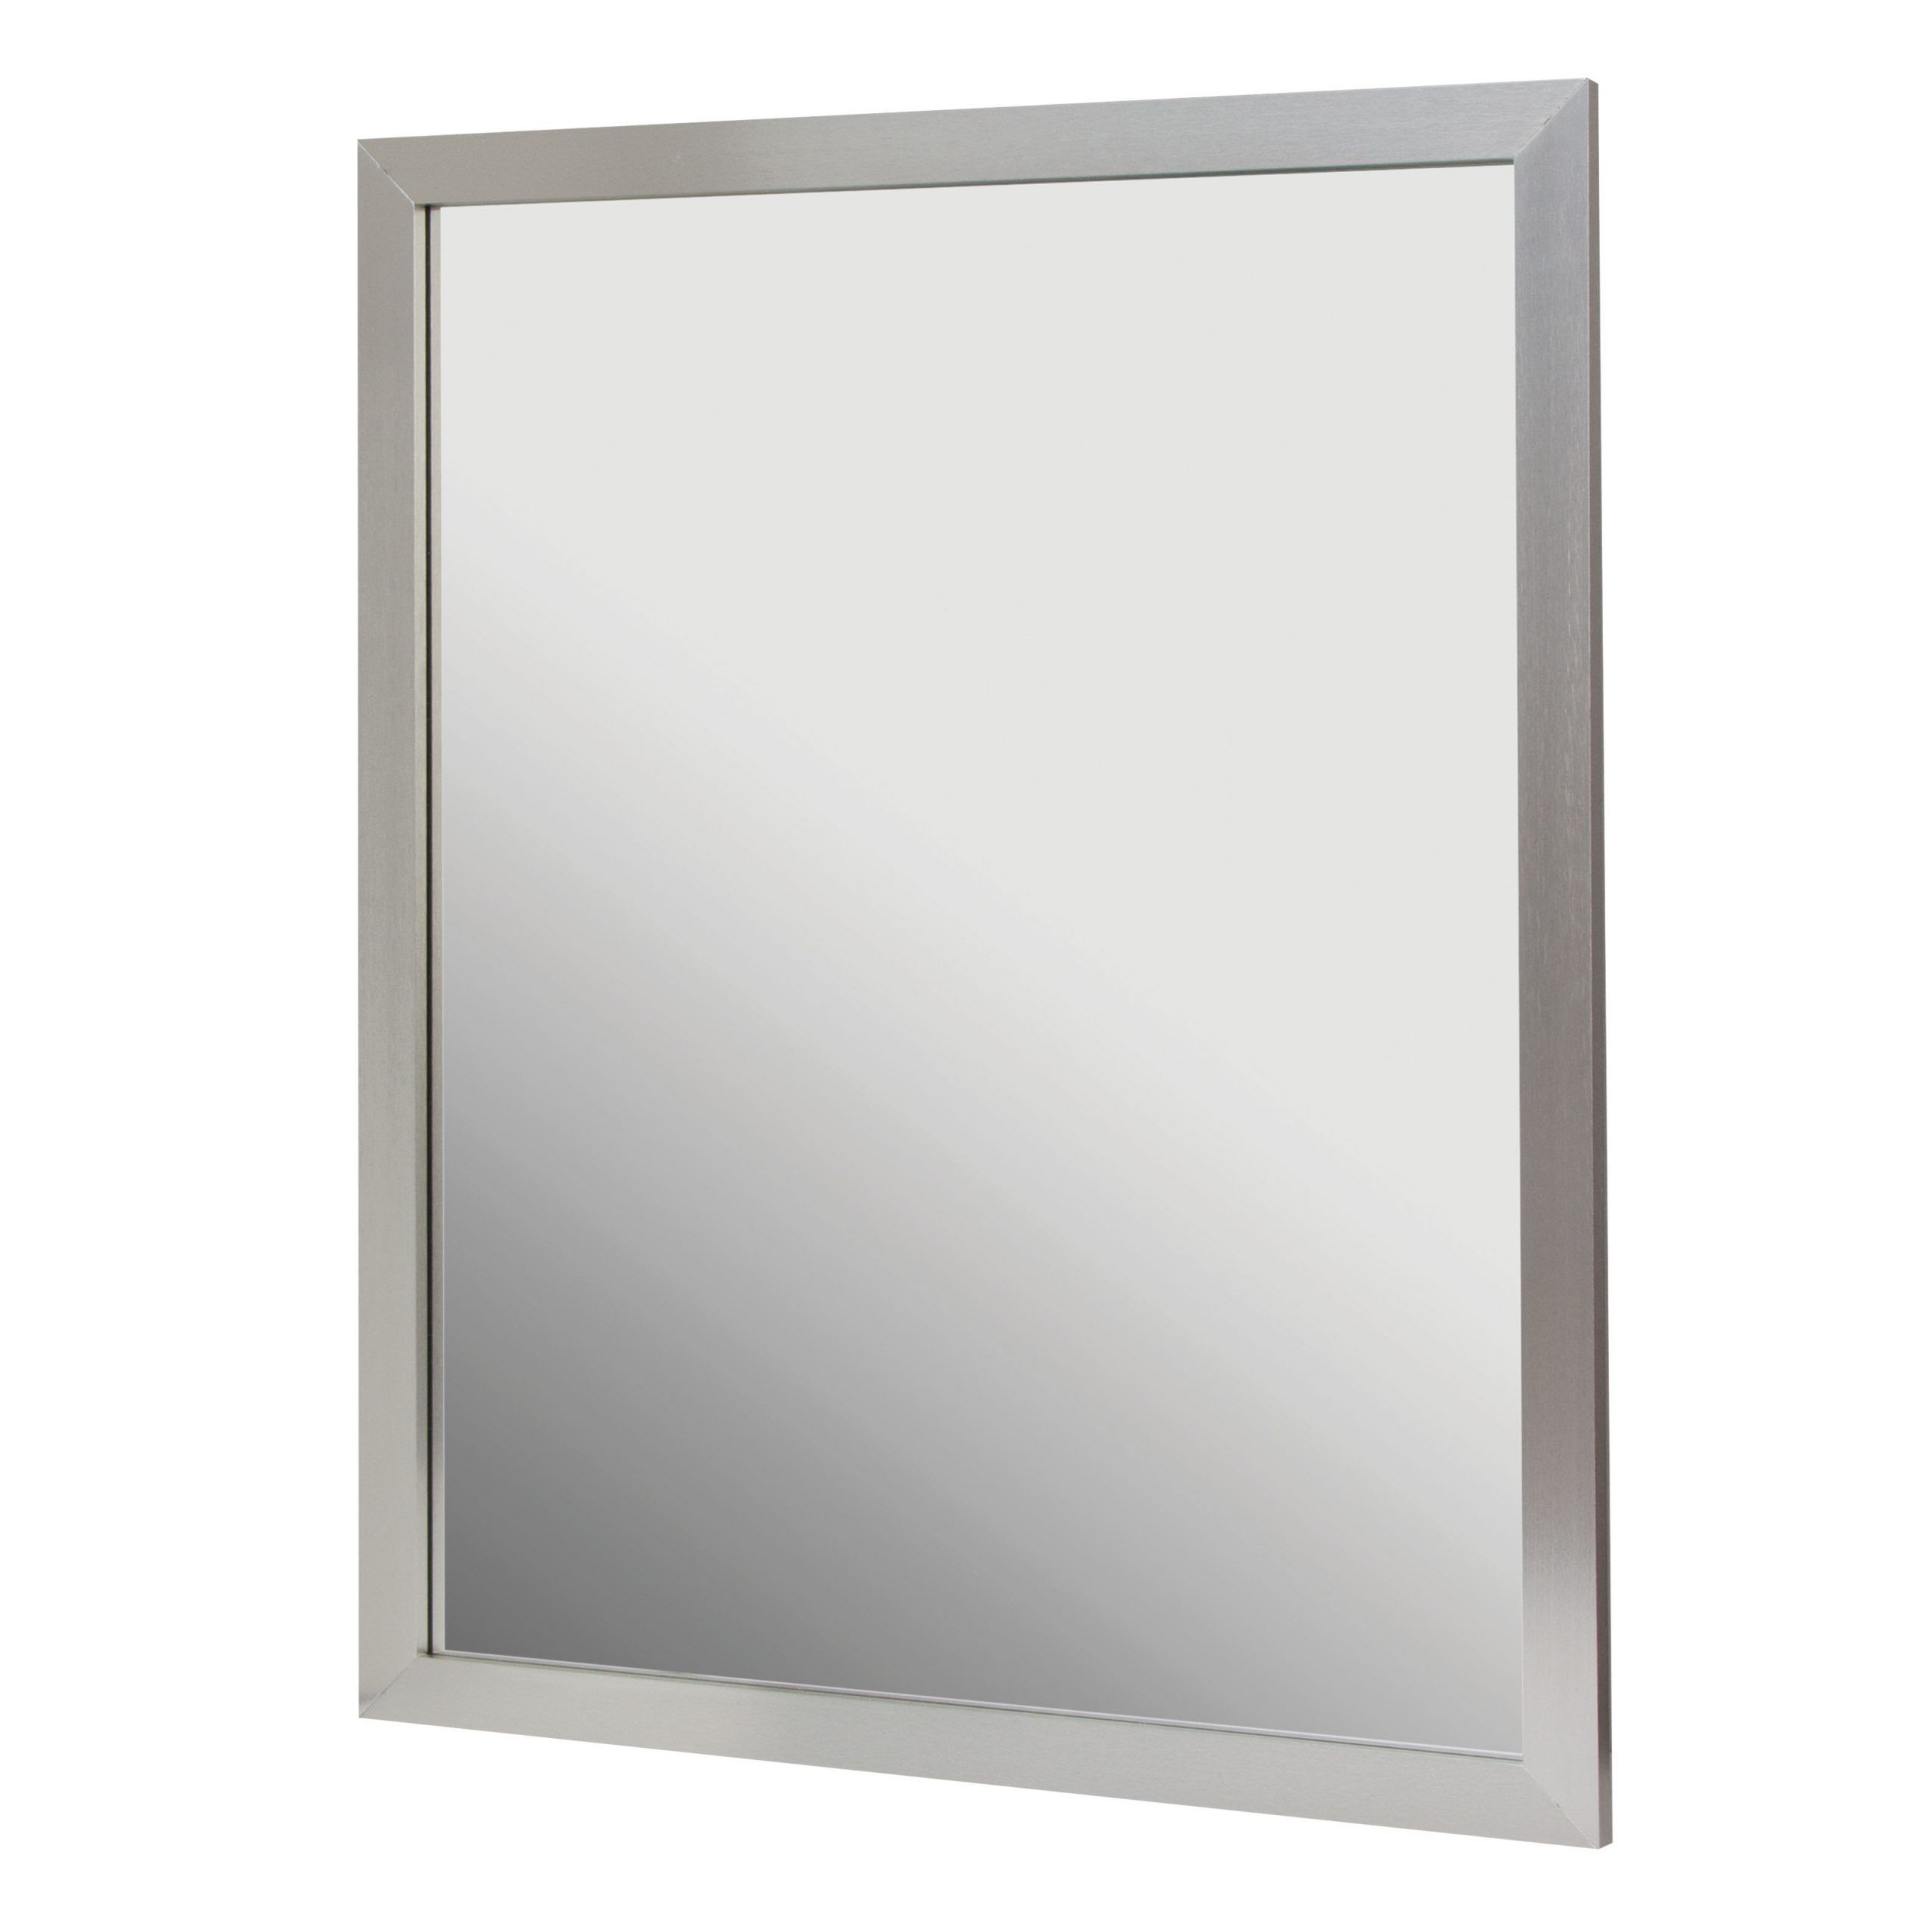 Most Recent Brushed Nickel Octagon Mirrors In 30x36 Aluminum Framed Mirror In Brushed Nickel – Foremost Bath (View 4 of 15)